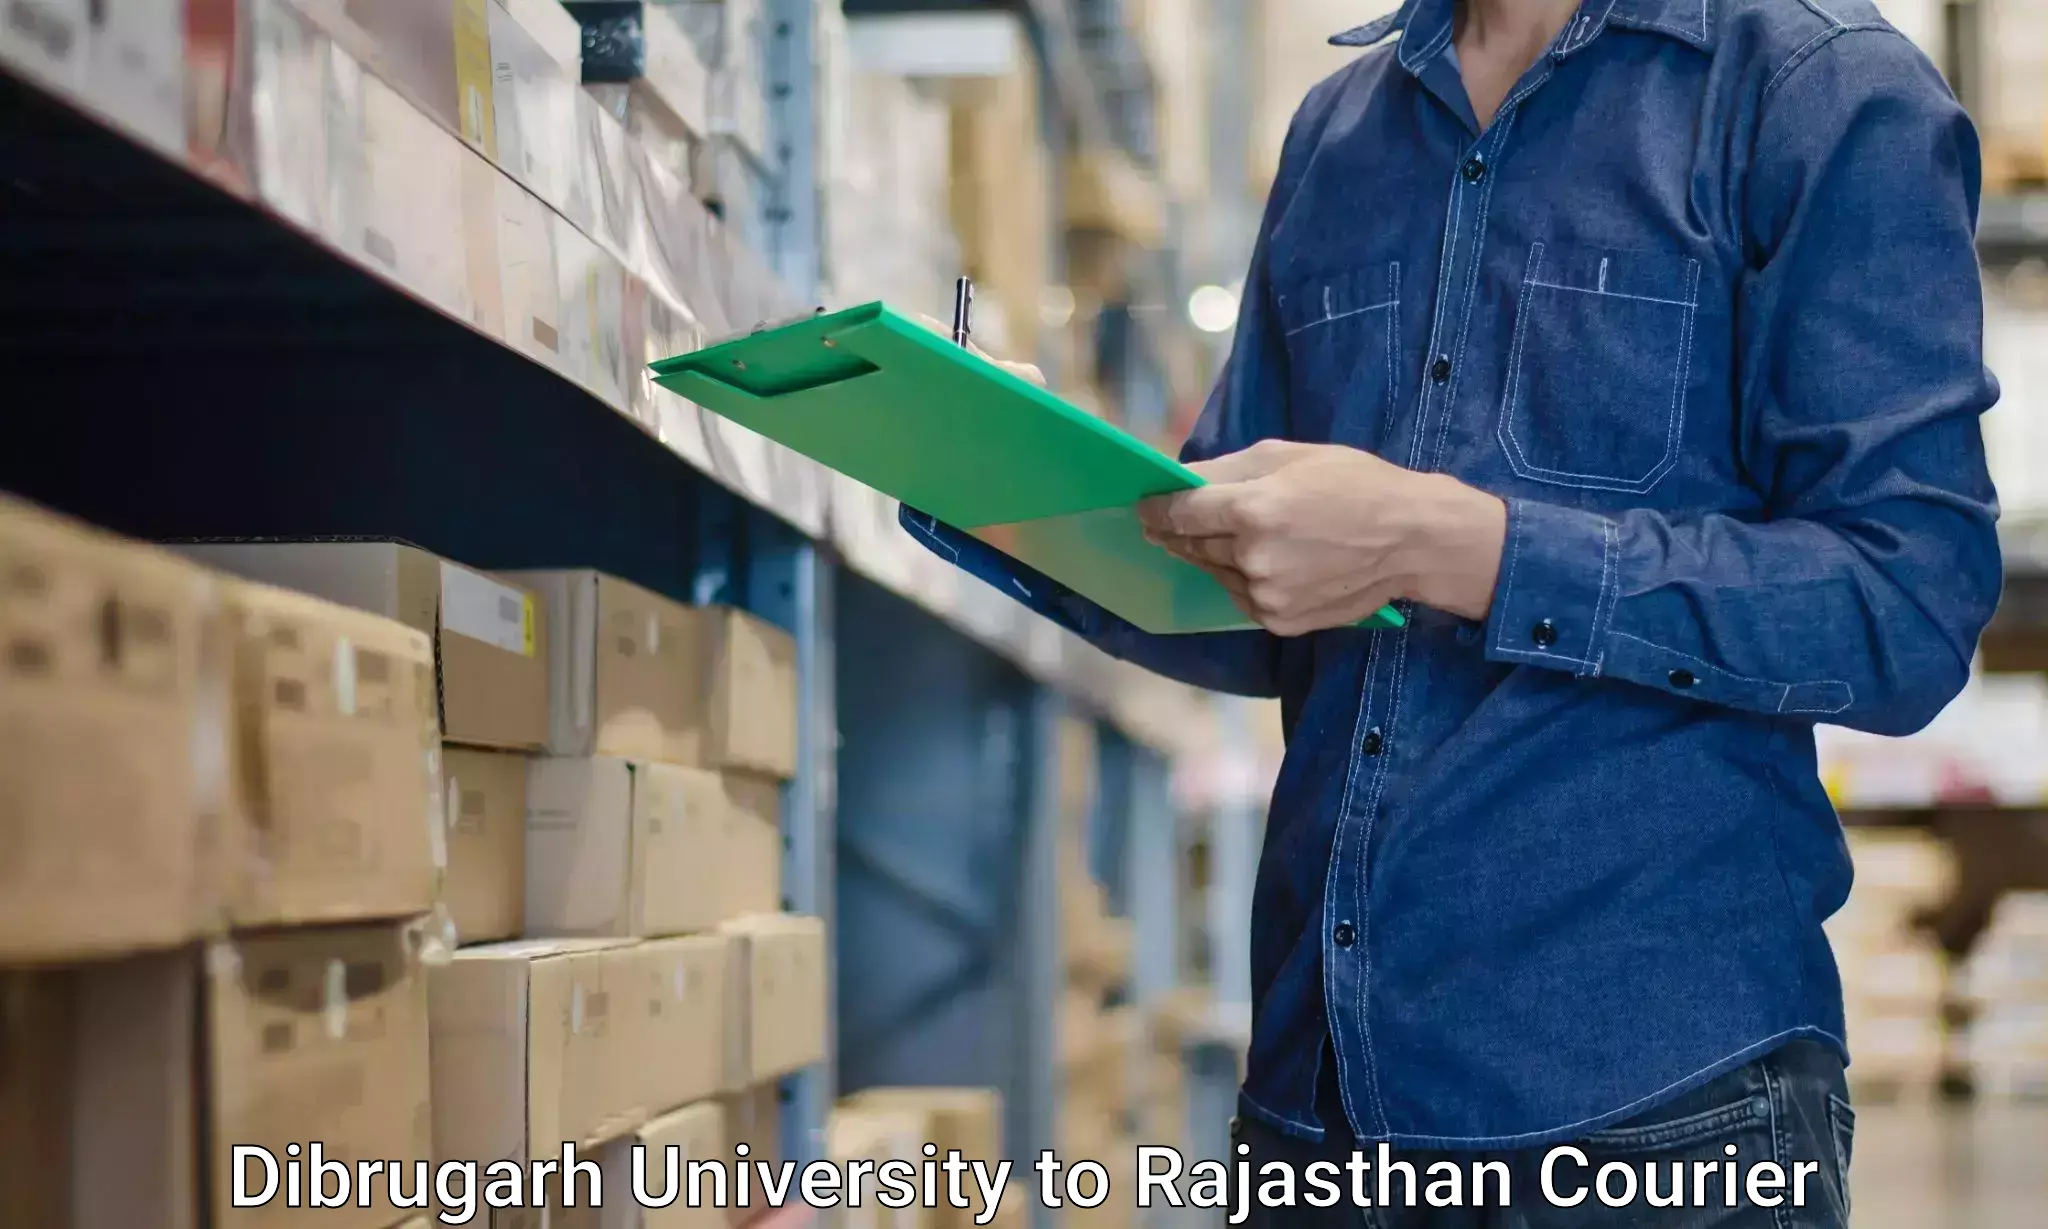 Efficient moving company Dibrugarh University to Rajasthan